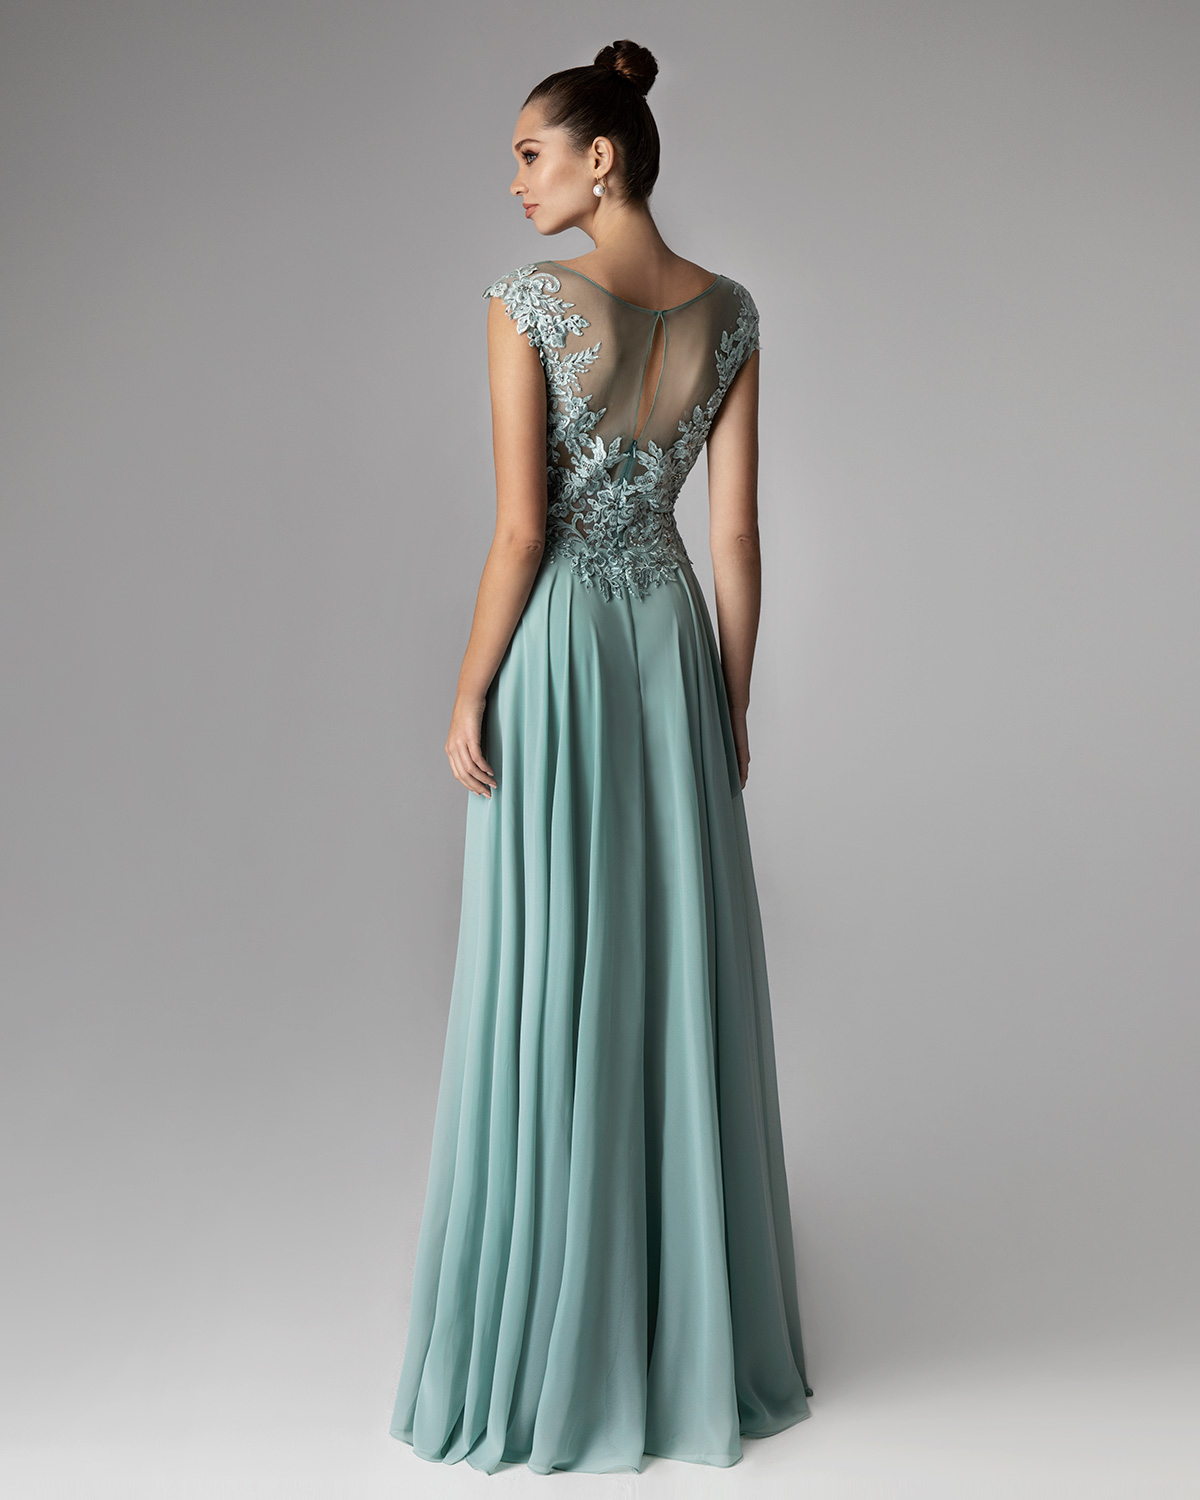 Long evening dress with lace top and chiffon skirt